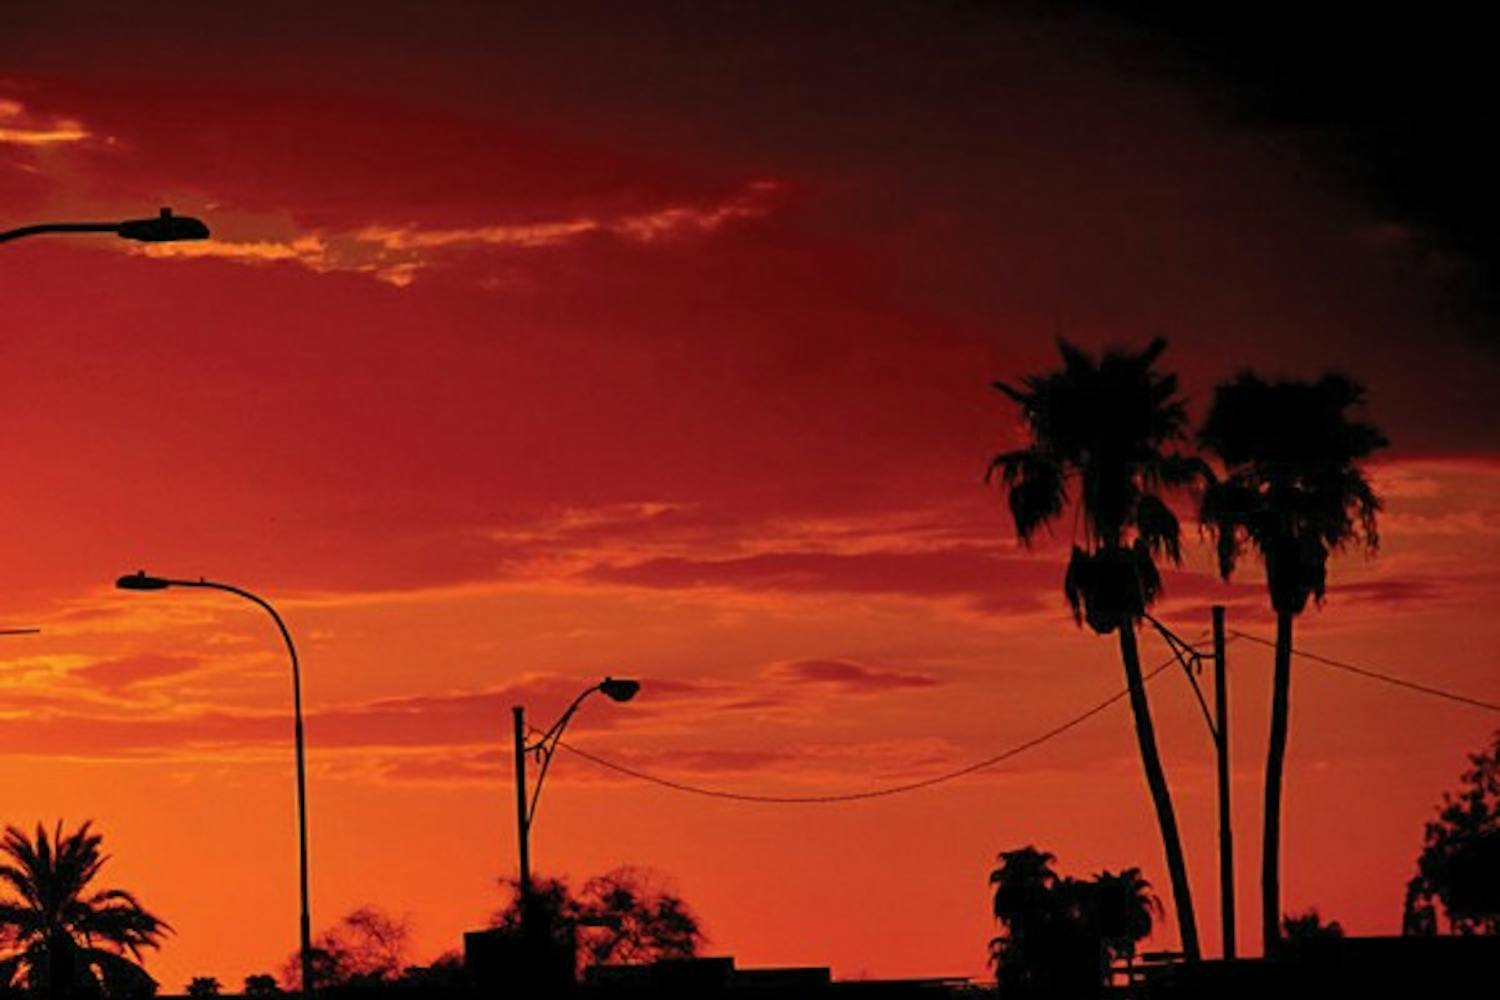 As the sun sets, the orange rays creates a silhouette on Tempe's concrete jungle. (Photo by Anand Aravamudhan)